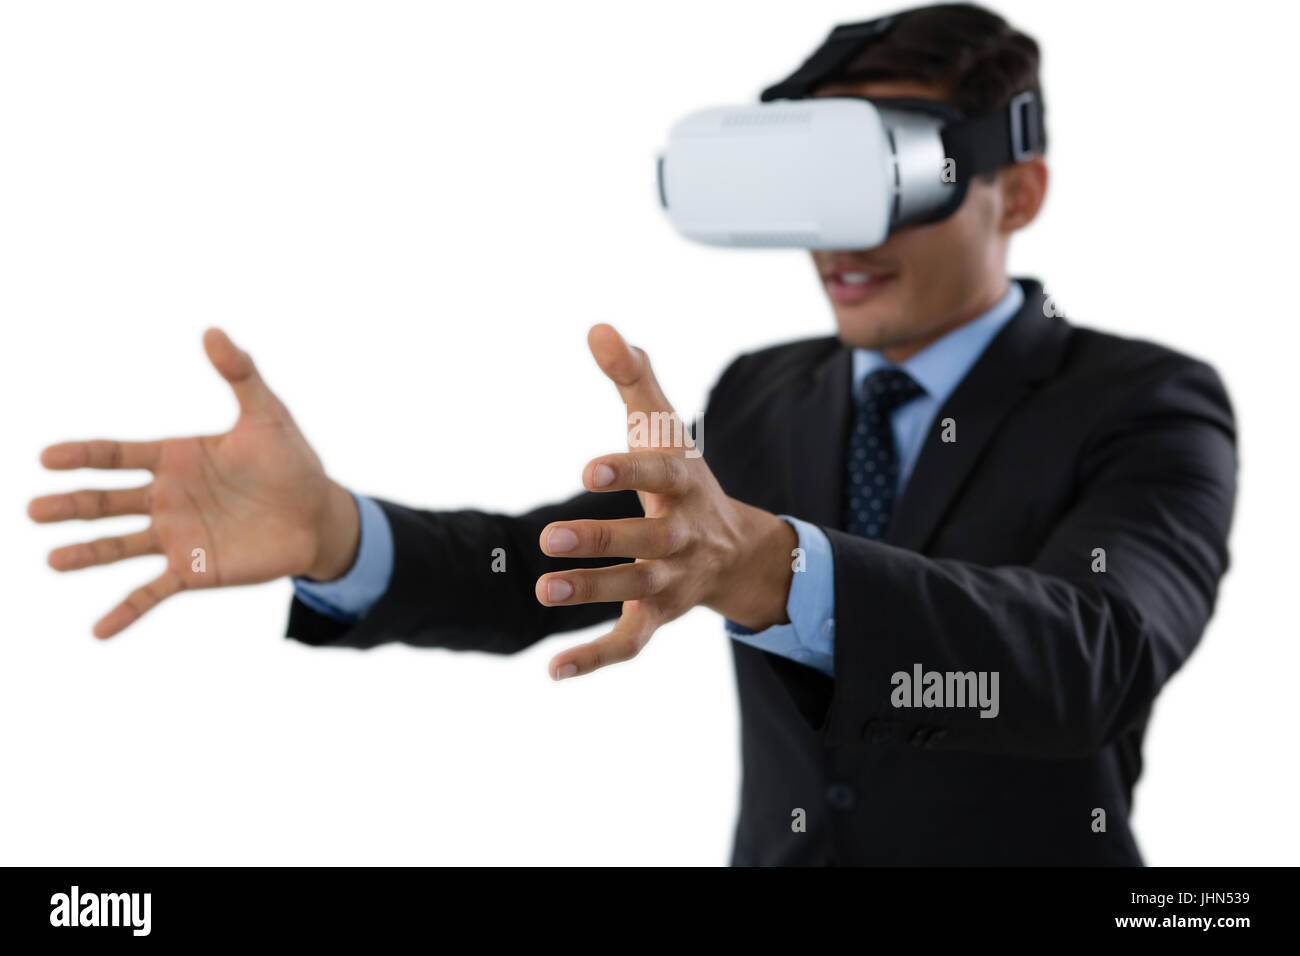 Smiling businessman gesturing while using vr glasses against white background Stock Photo